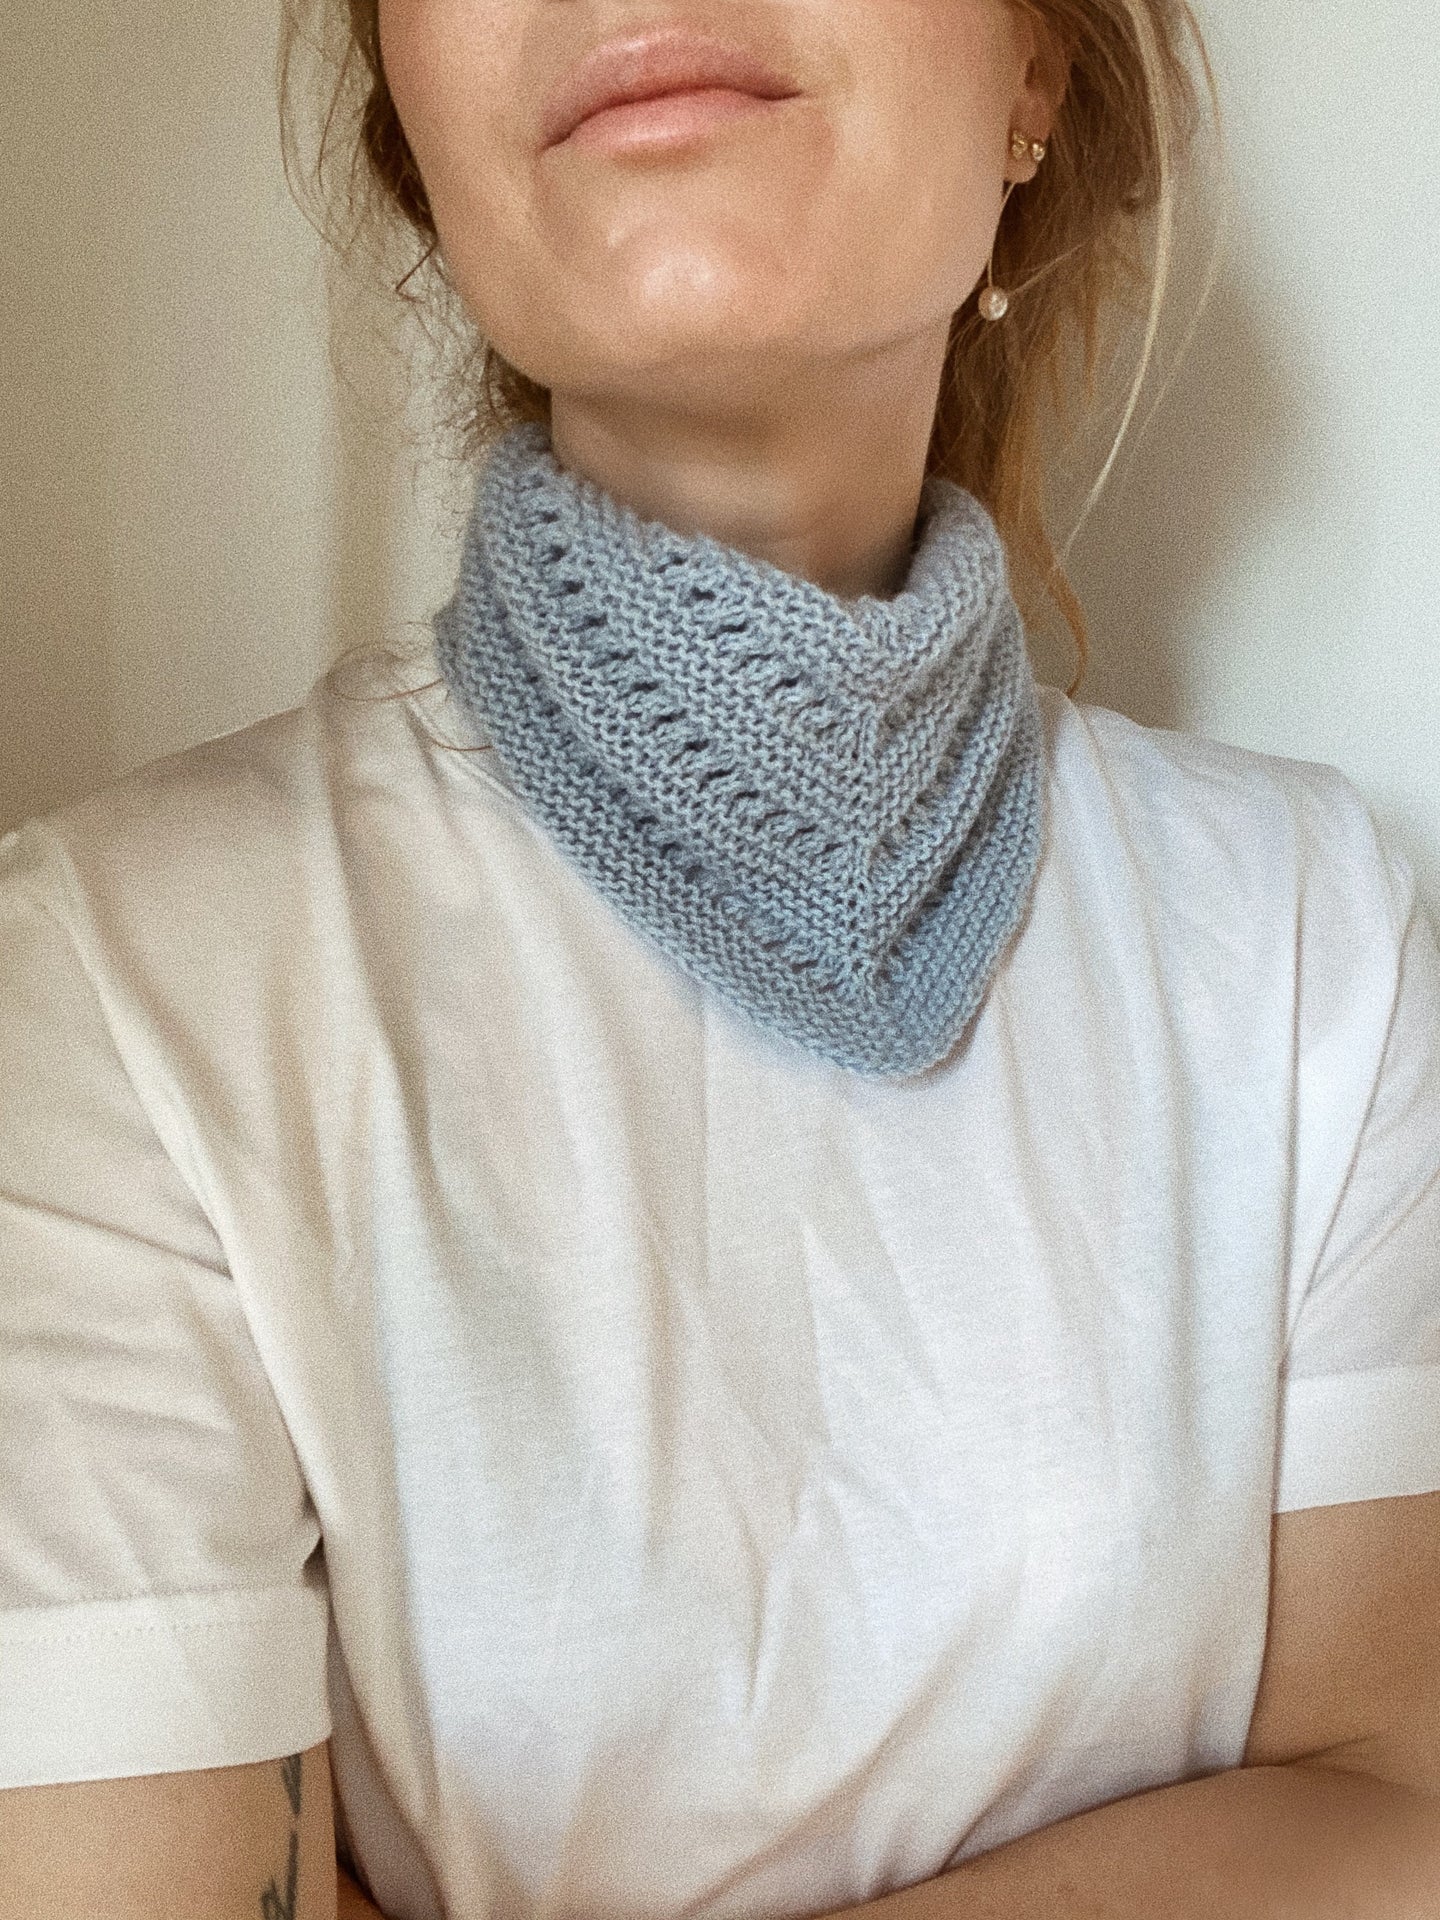 Scarf No. 1 - Knitting Pattern in English – • MY FAVOURITE THINGS • KNITWEAR